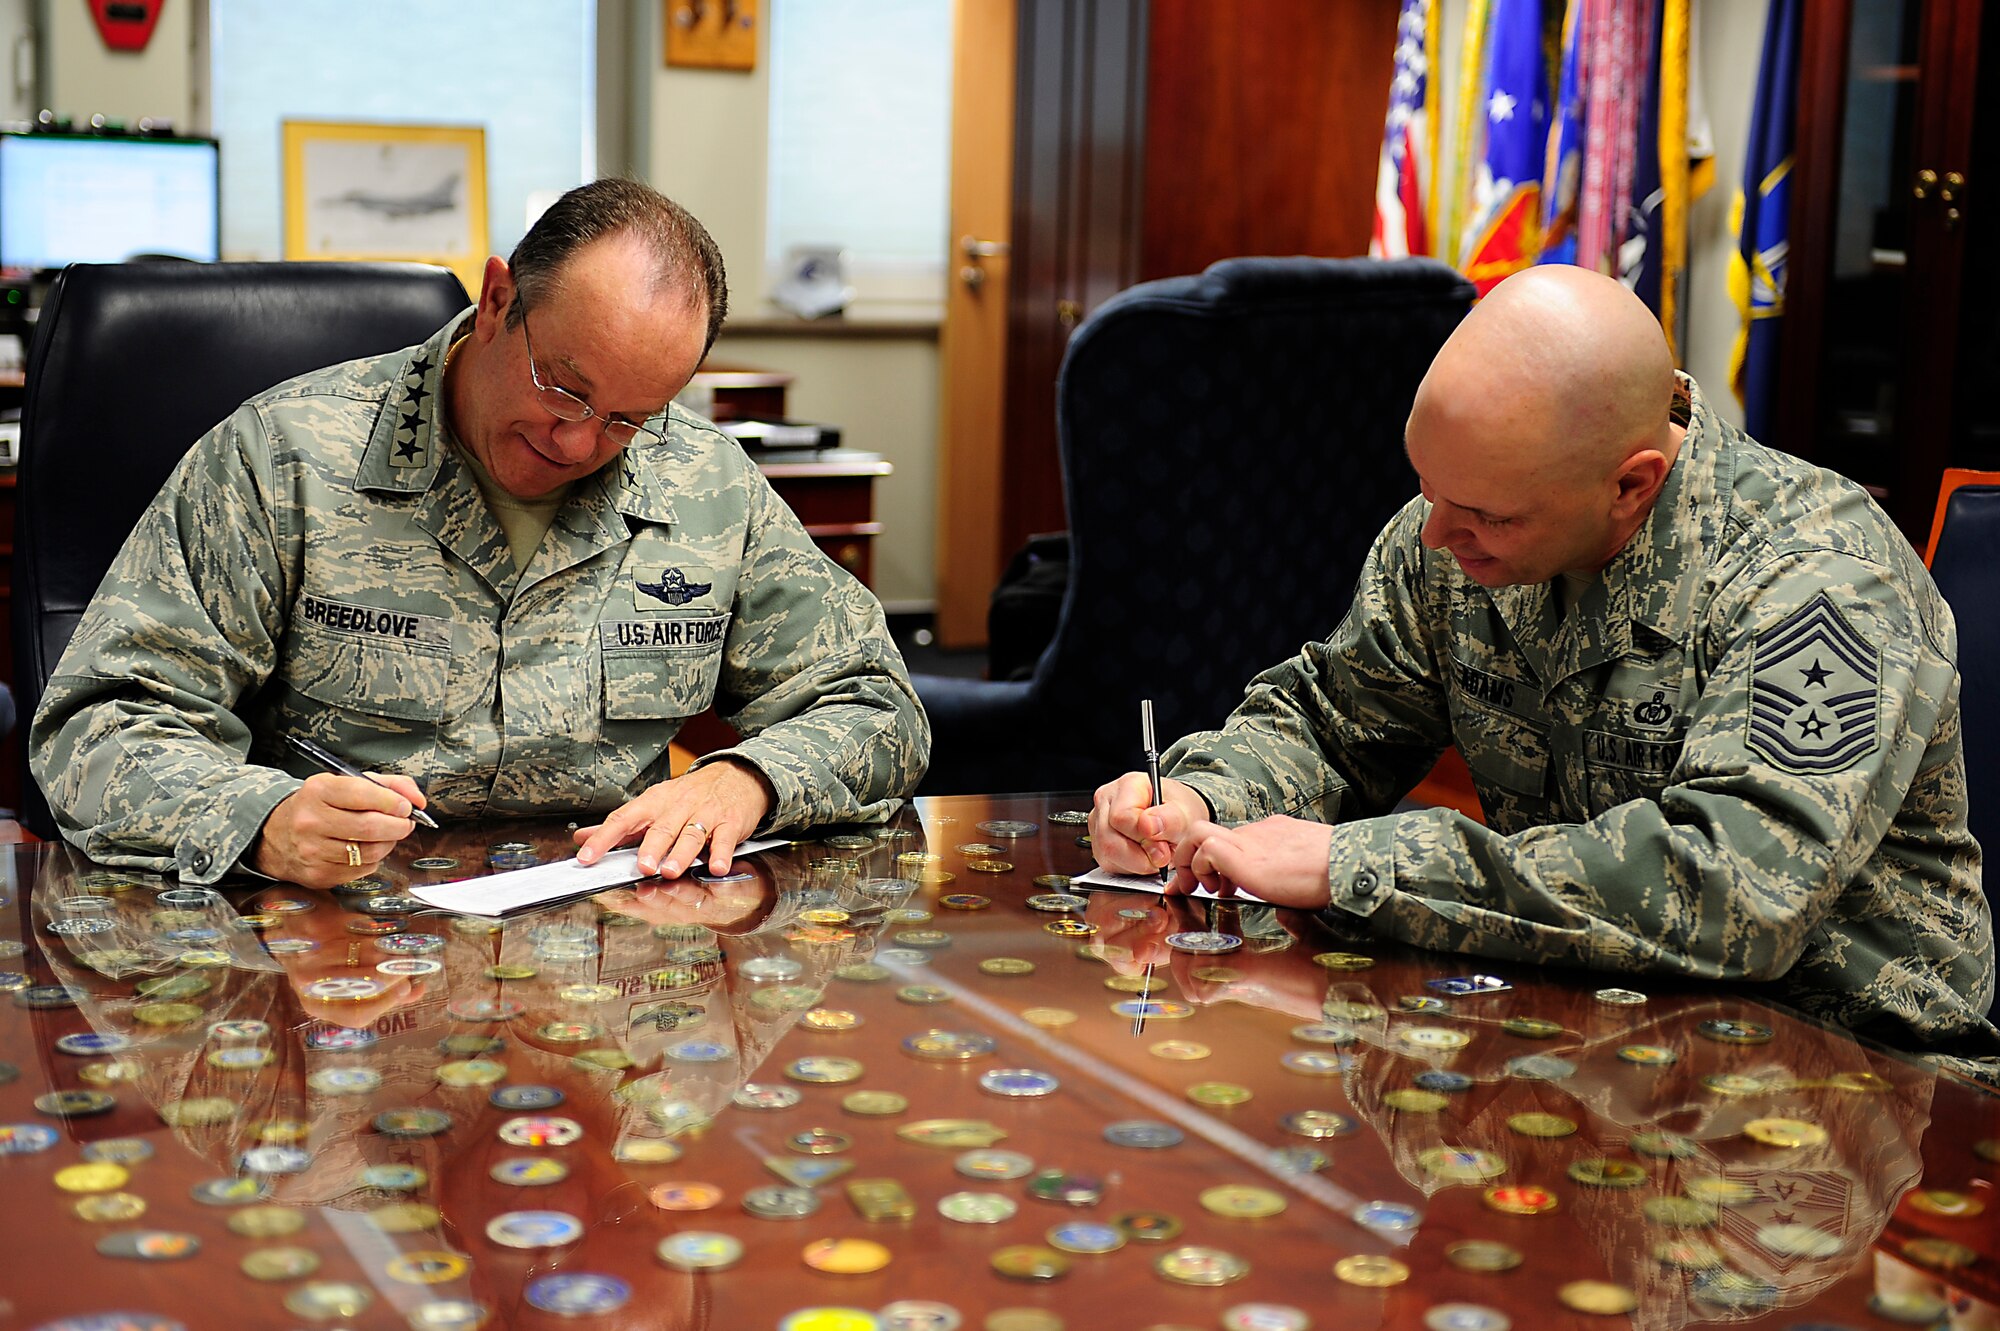 Gen. Philip M. Breedlove, U.S. Air Forces in Europe and Air Forces Africa commander (left), and USAFE-AFAFRICA Command Chief Craig A. Adams, complete their Air Force Assistance Fund contribution forms April 2 in the commander’s office here. The AFAF was established to provide assistance through donations to organizations charged with helping Airmen and their families. (U.S. Air Force photo by Airman 1st Class Holly Cook)